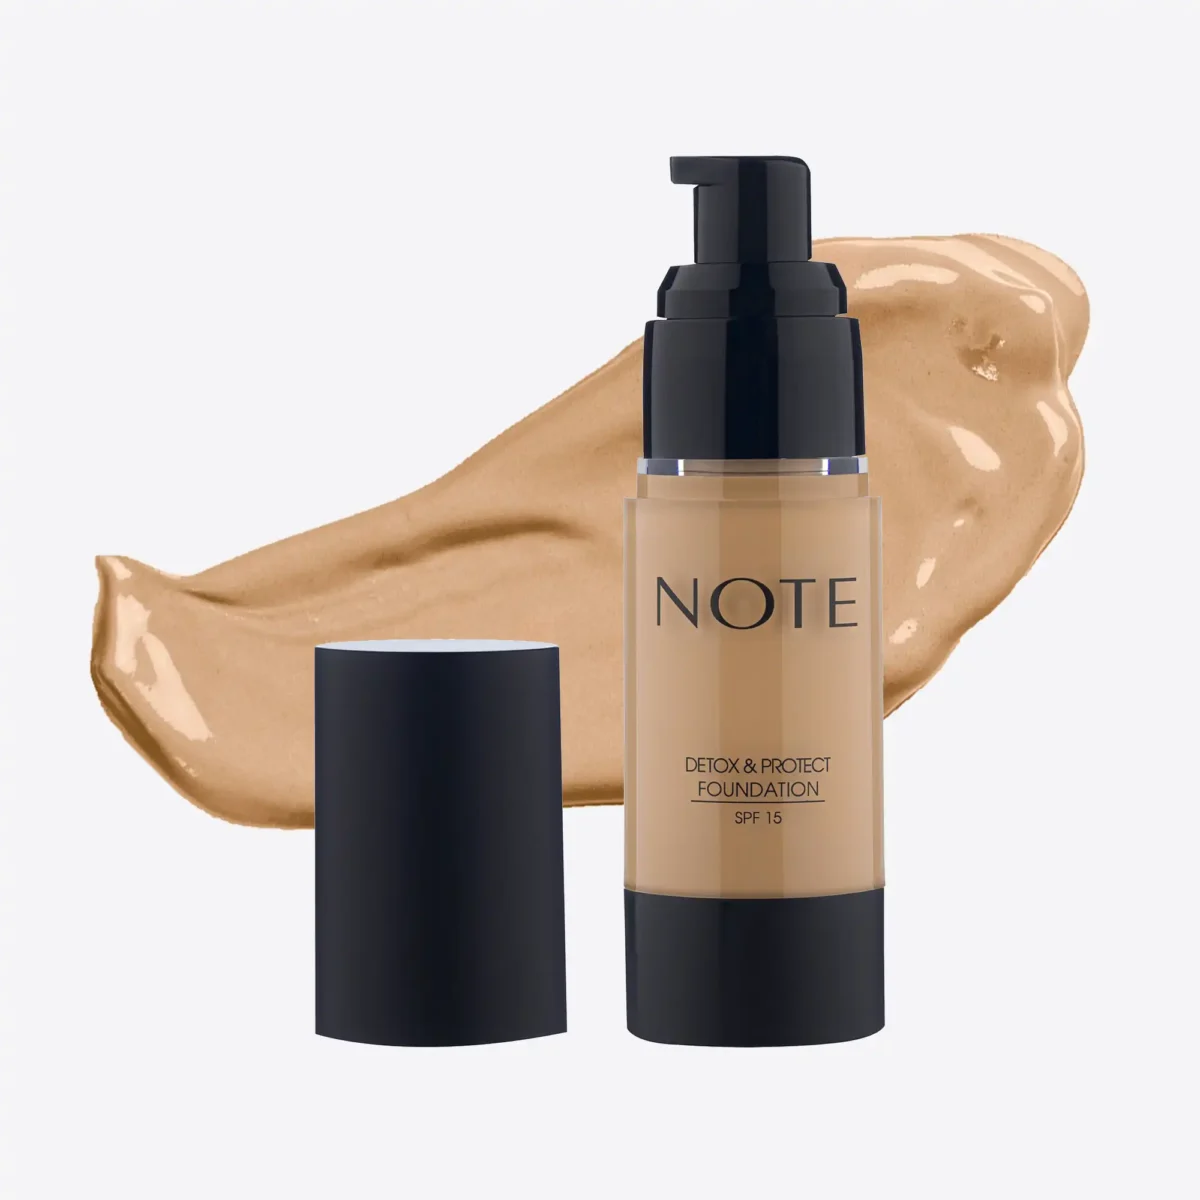 Note Detox and Protect Foundation 05 Honey Beige